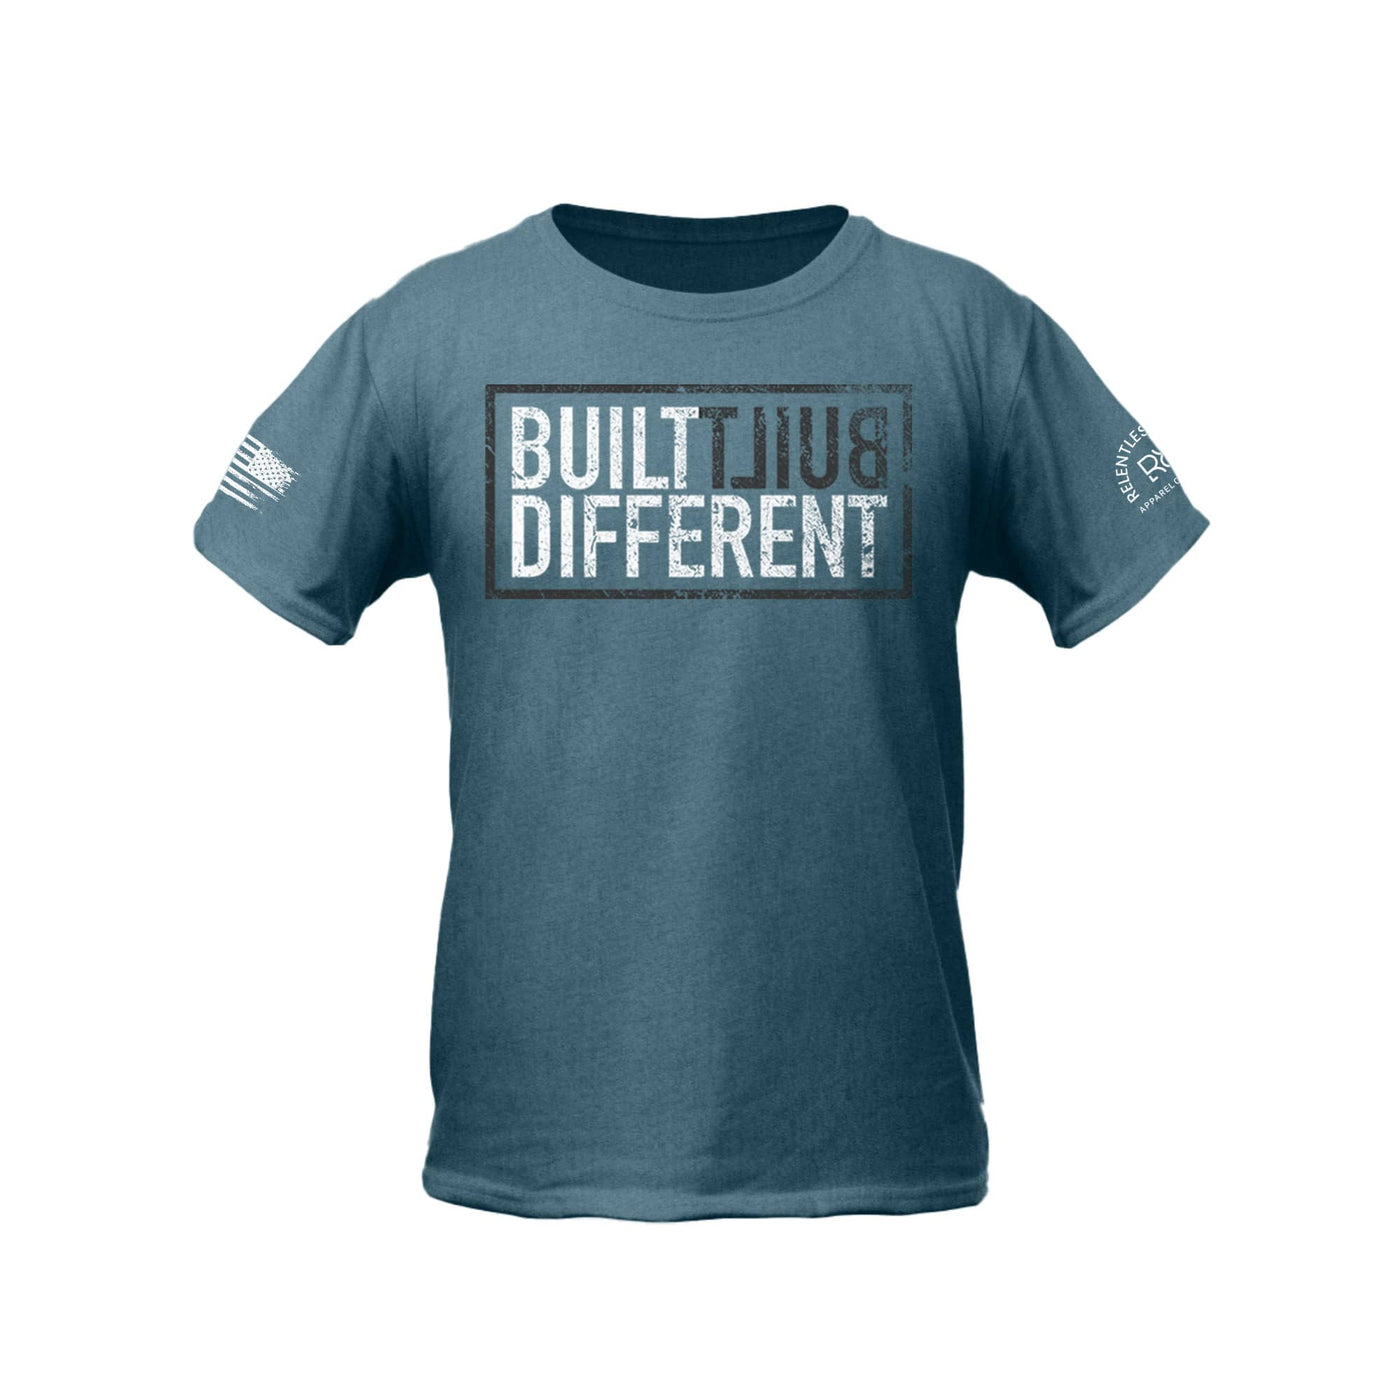 Built Different Youth front design deep teal tee